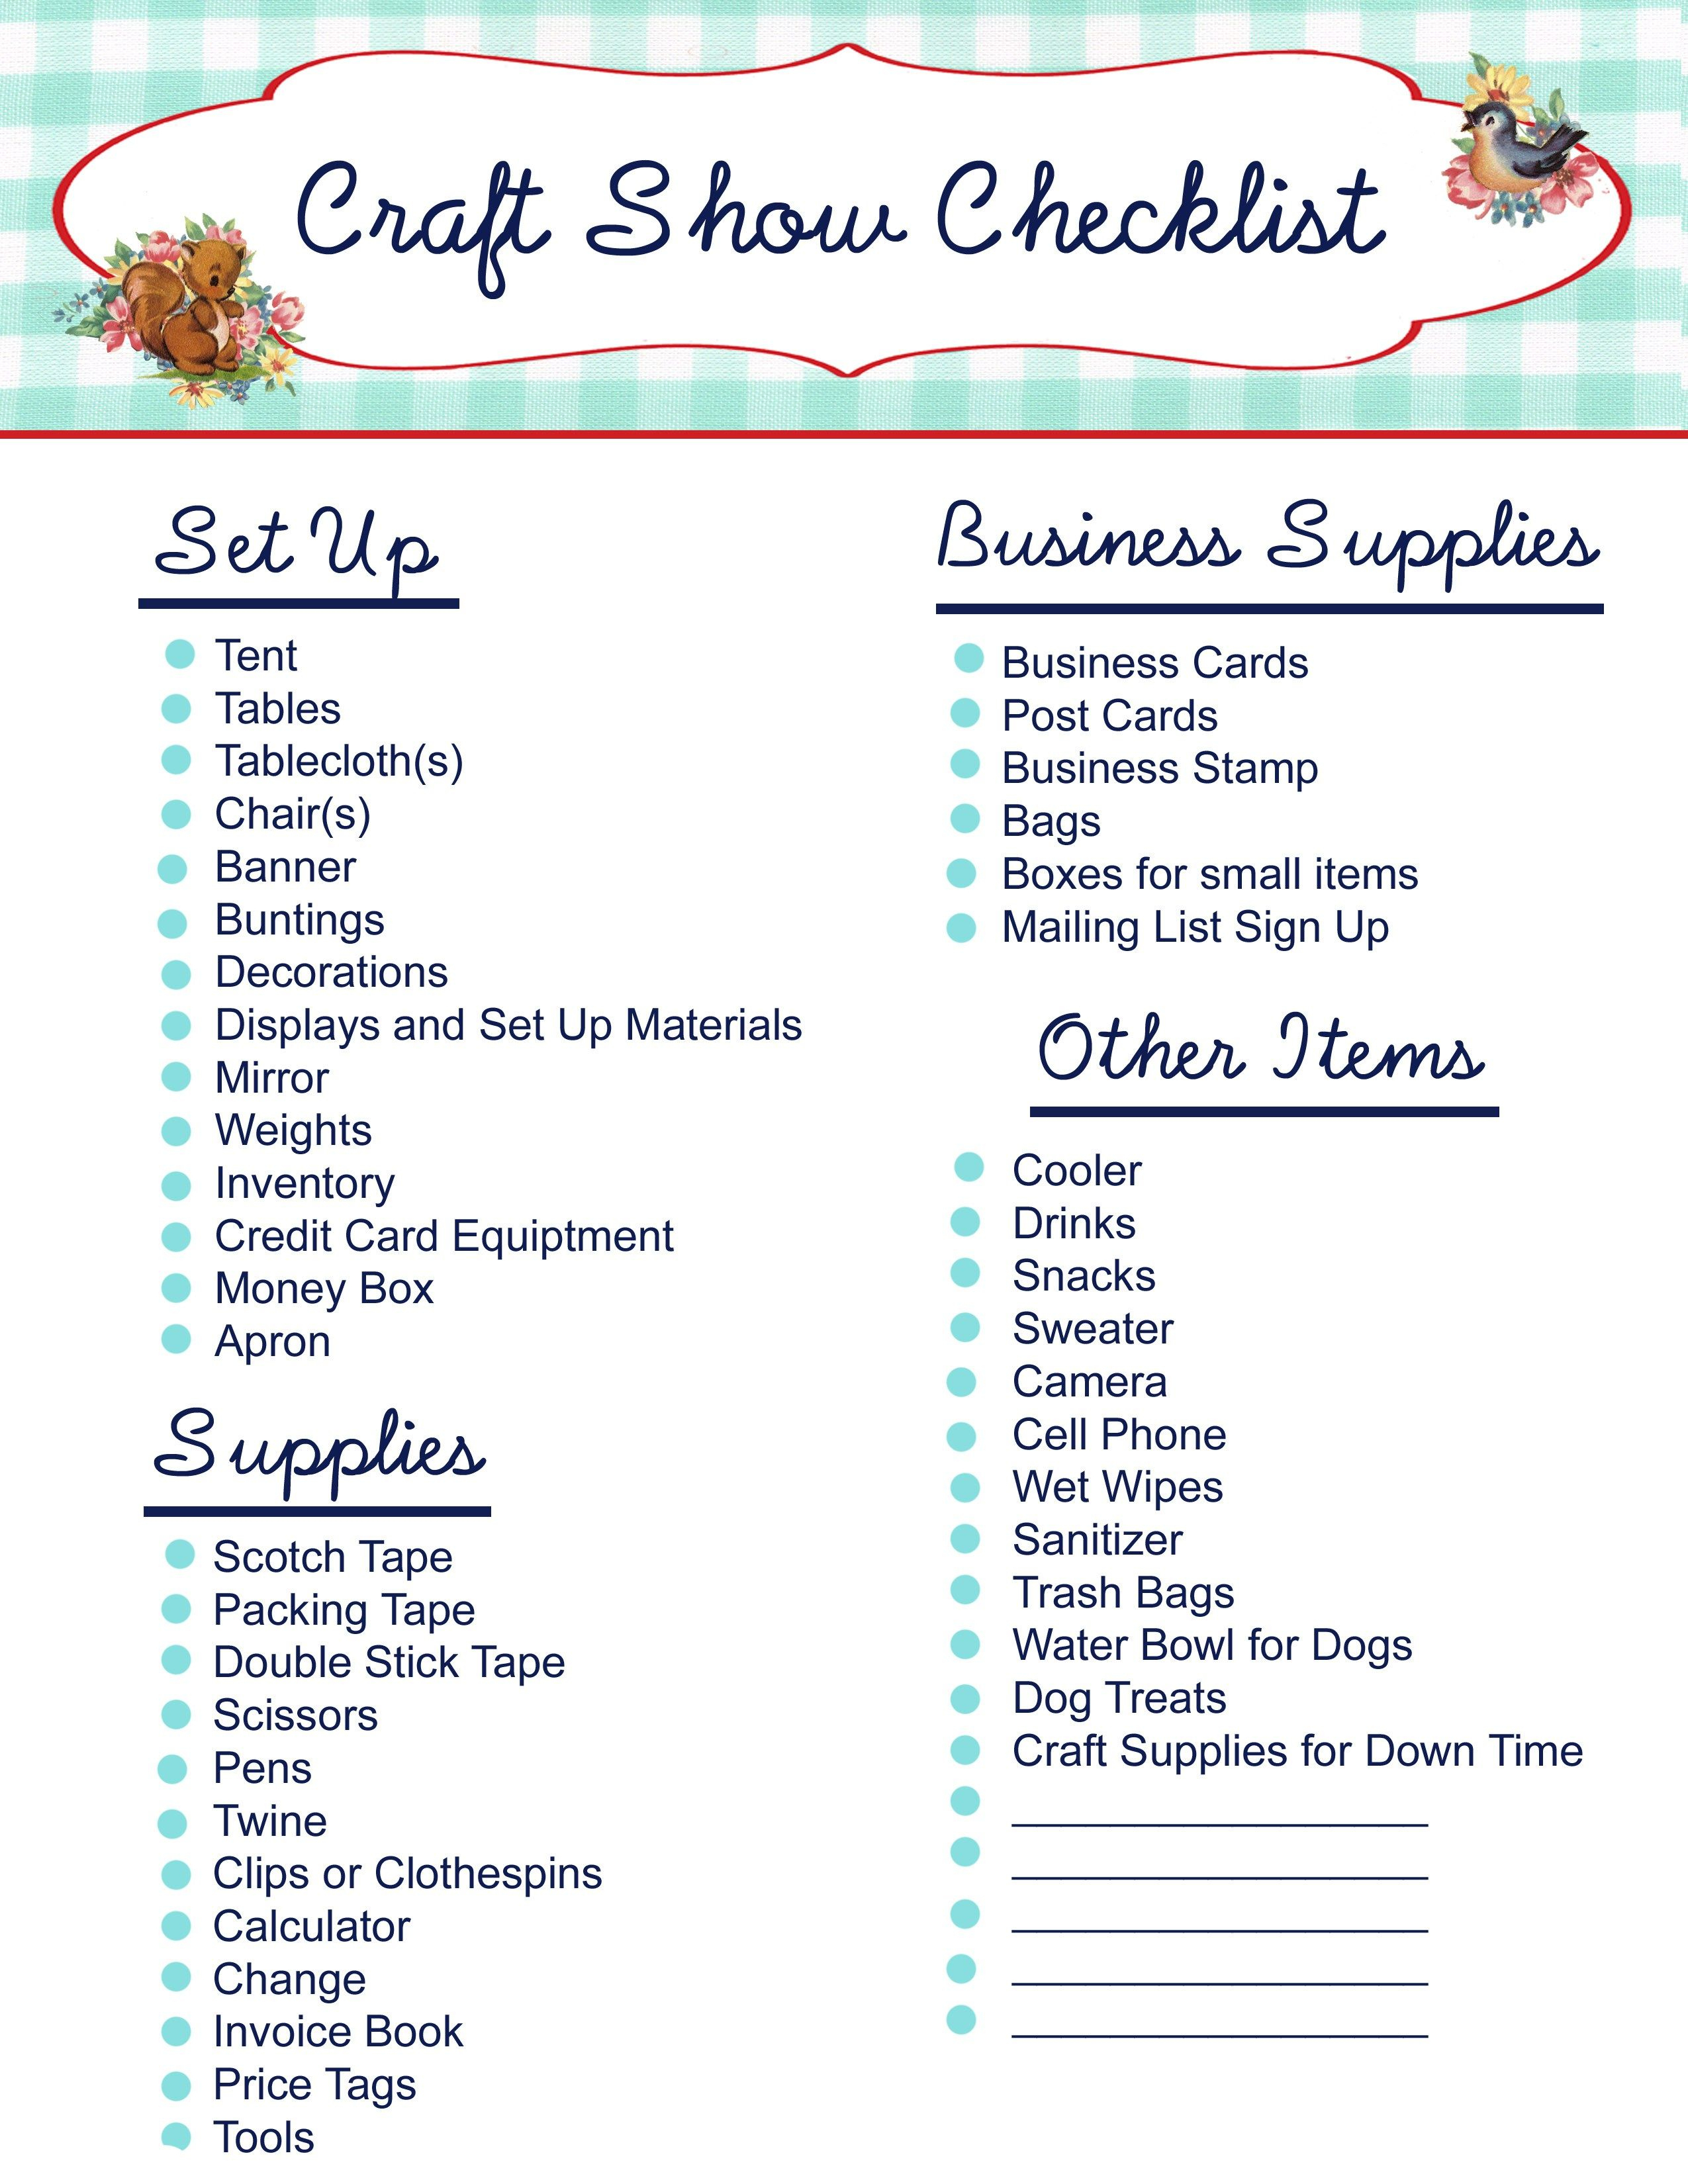 Free Printable- Craft Show Checklist - My So Called Crafty Life - Free Printable Mirrored Numbers